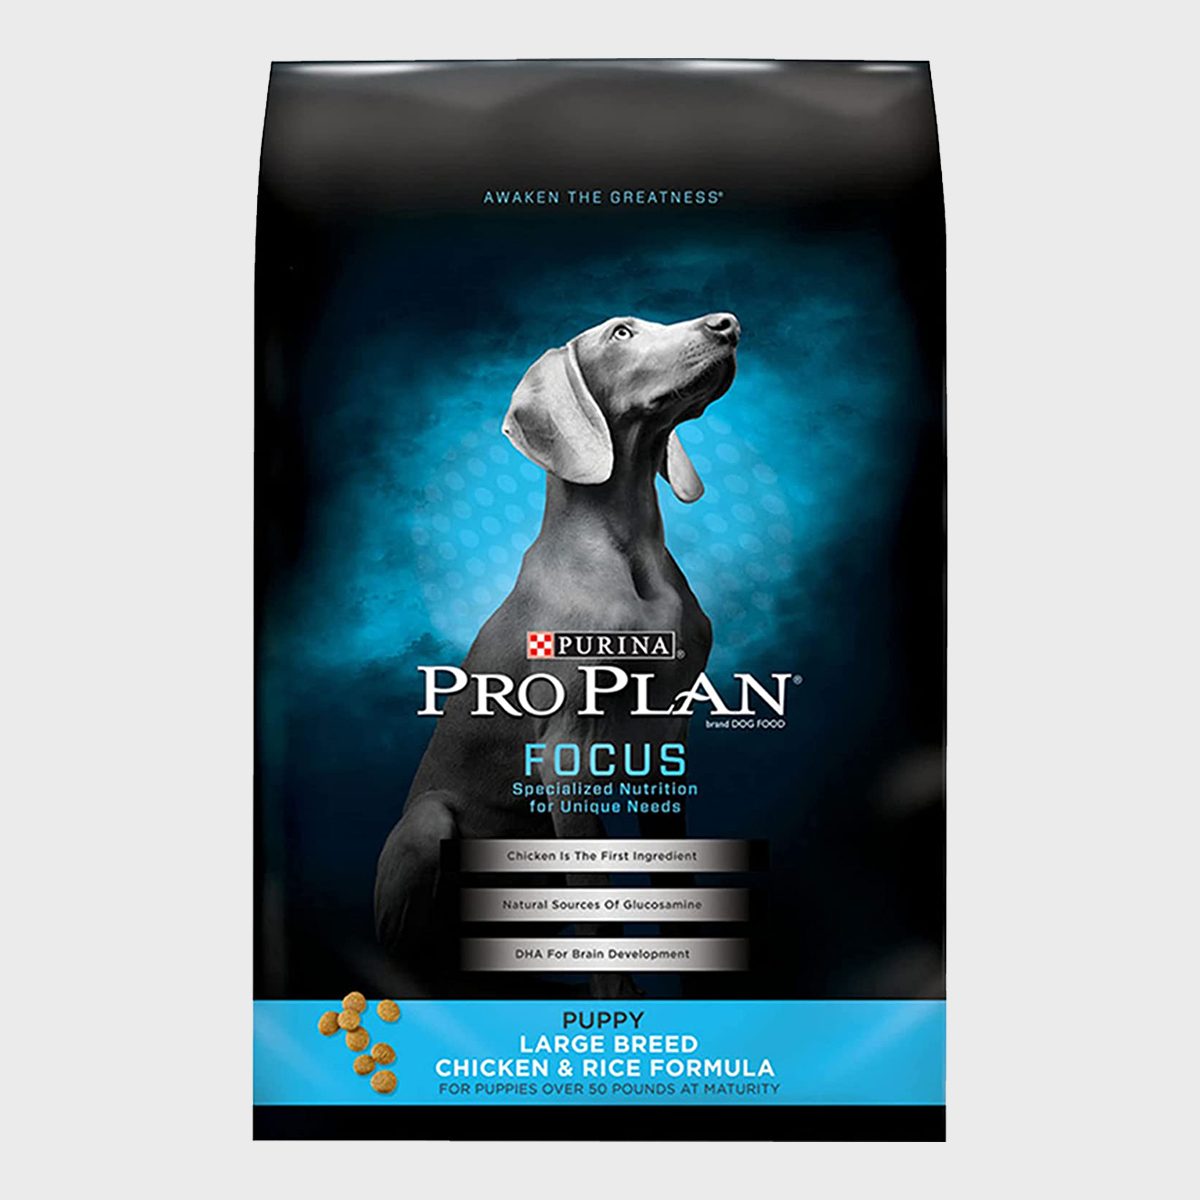 <p>Dr. Melillo is a fan of this dry dog food—and not just because it helps your fur baby maintain a <a href="https://www.rd.com/list/signs-pet-overweight/">healthy weight</a>. It also contains oatmeal, which is good for dogs with sensitive stomachs, and prebiotics to further promote digestive health. Beyond that, you'll find sunflower oil, which is rich in omega-6 fatty acids for a shiny, healthy coat, and fish-oil-derived omega-3s. Purina Pro Plan also offers a number of protein and taste options for your pet, depending on his preference.</p> <p><strong>Highlights:</strong></p> <ul> <li>Made with omega-3 fatty acids</li> <li>Good for sensitive stomachs</li> <li>Nourishes the skin and coat</li> </ul> <p class="listicle-page__cta-button-shop"><a class="shop-btn" href="https://www.amazon.com/Purina-Pro-Plan-Chicken-Formula/dp/B002OY0Q9K?tag=reader_msn-20&asc_refurl=https://www.rd.com/list/best-large-breed-dog-food/">Shop Now</a></p>